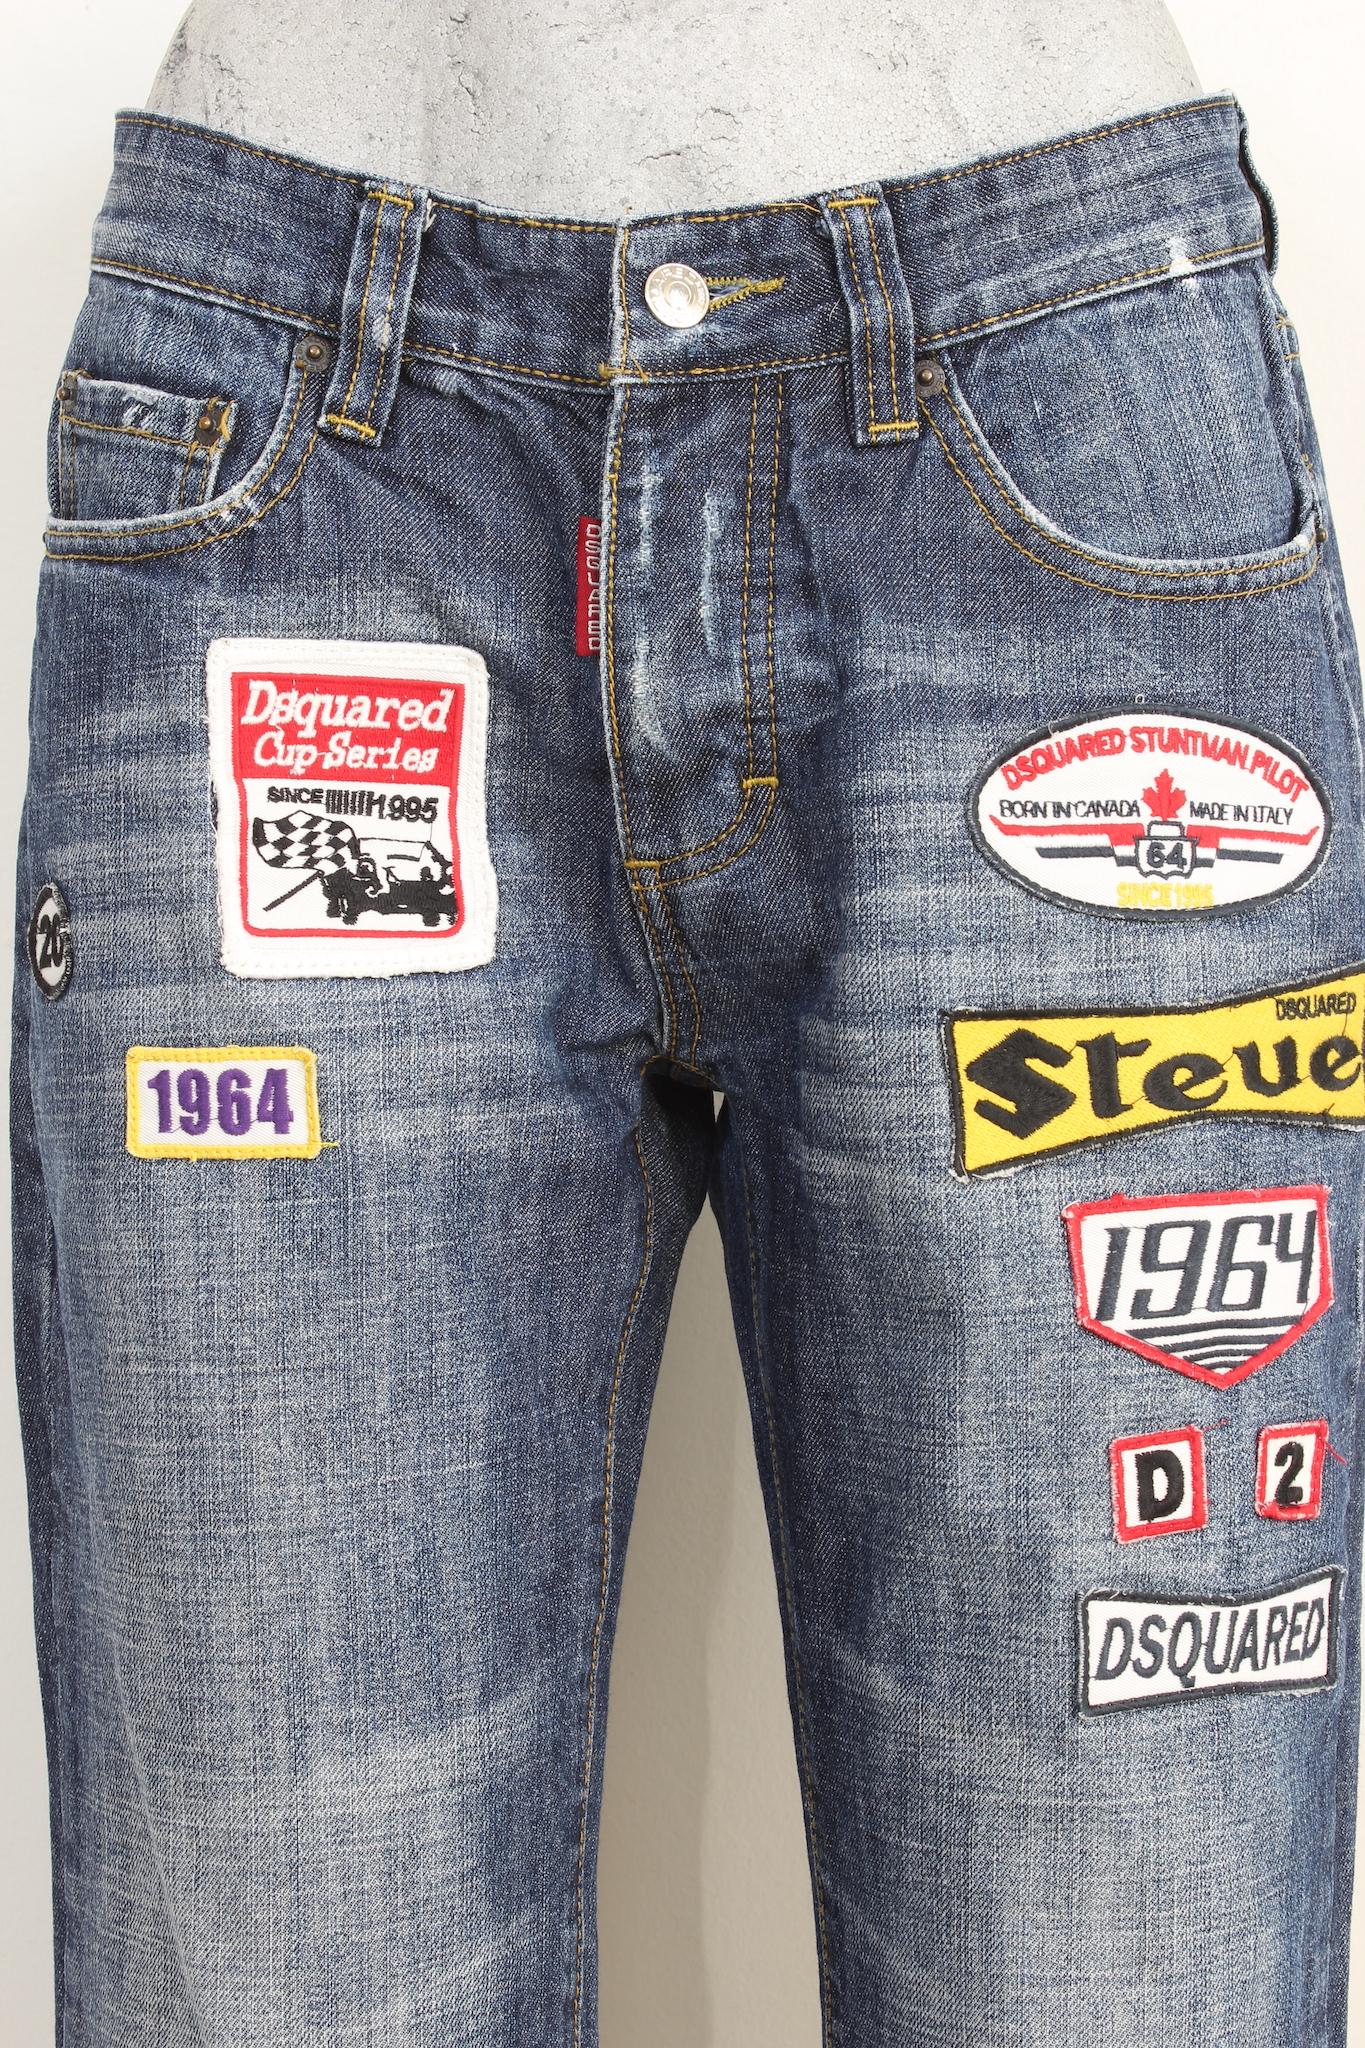 Dsquared Cup Series Blue Straight Jeans 2000s In Excellent Condition For Sale In Brindisi, Bt